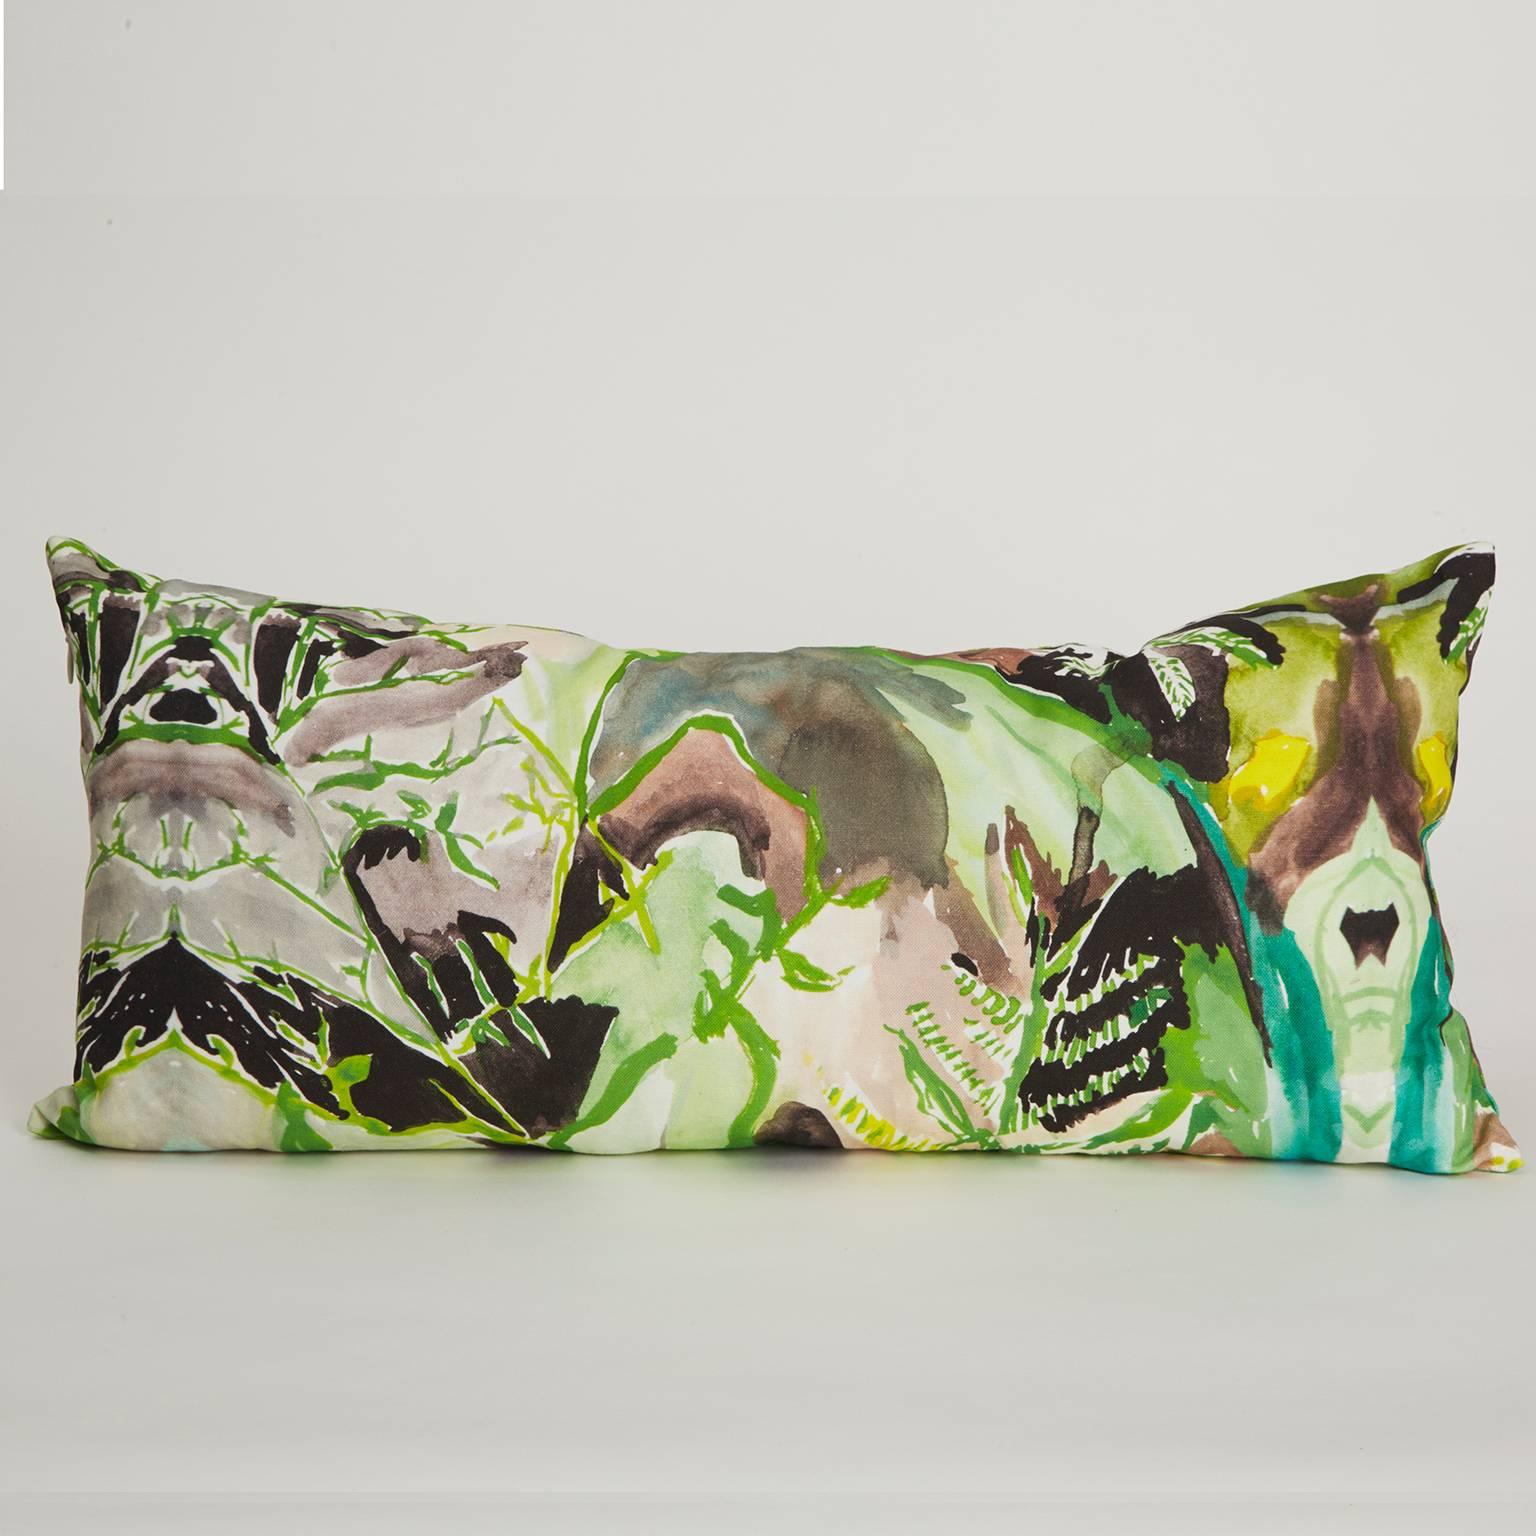 The Rectangle Fern Pillow is digitally printed with an original watercolor painting by Naomi Clark. Every piece out of Clark's abstract and richly colored print collection for Fort Makers adds beauty, art and comfort to the home.

Materials: linen